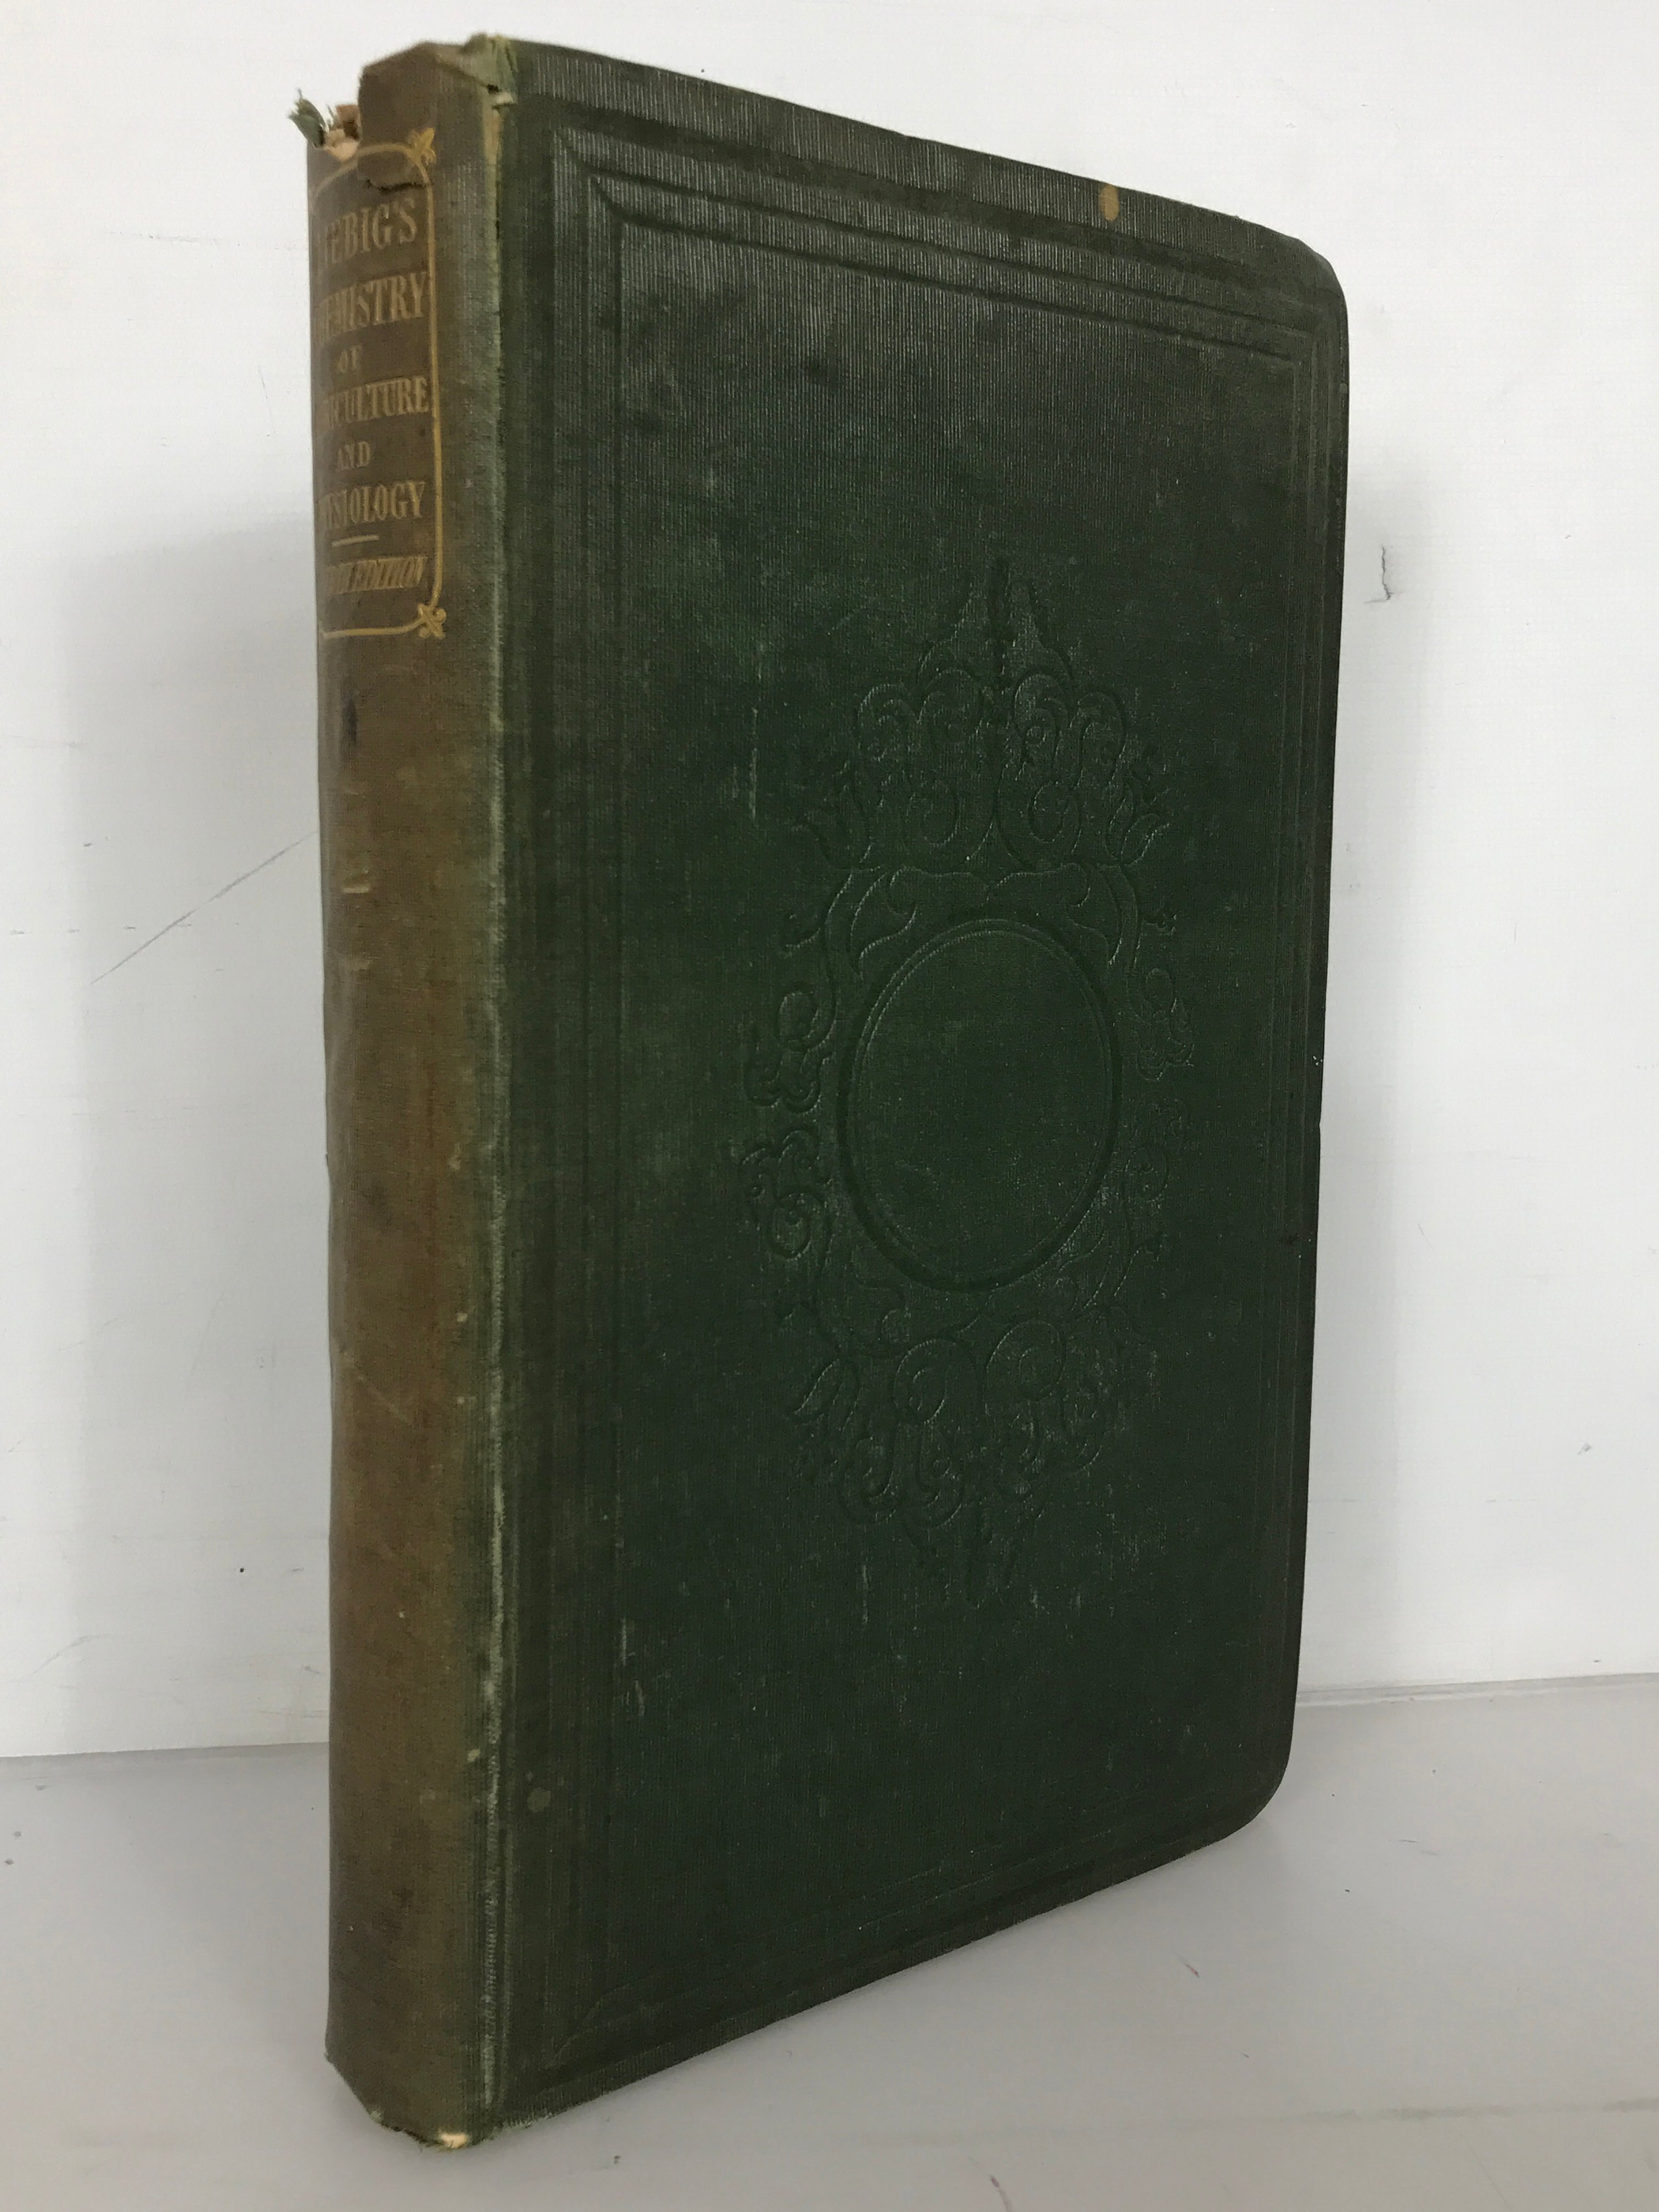 Chemistry in its Applications to Agriculture and Physiology by Justus Liebig Fourth Edition 1847 HC Antique